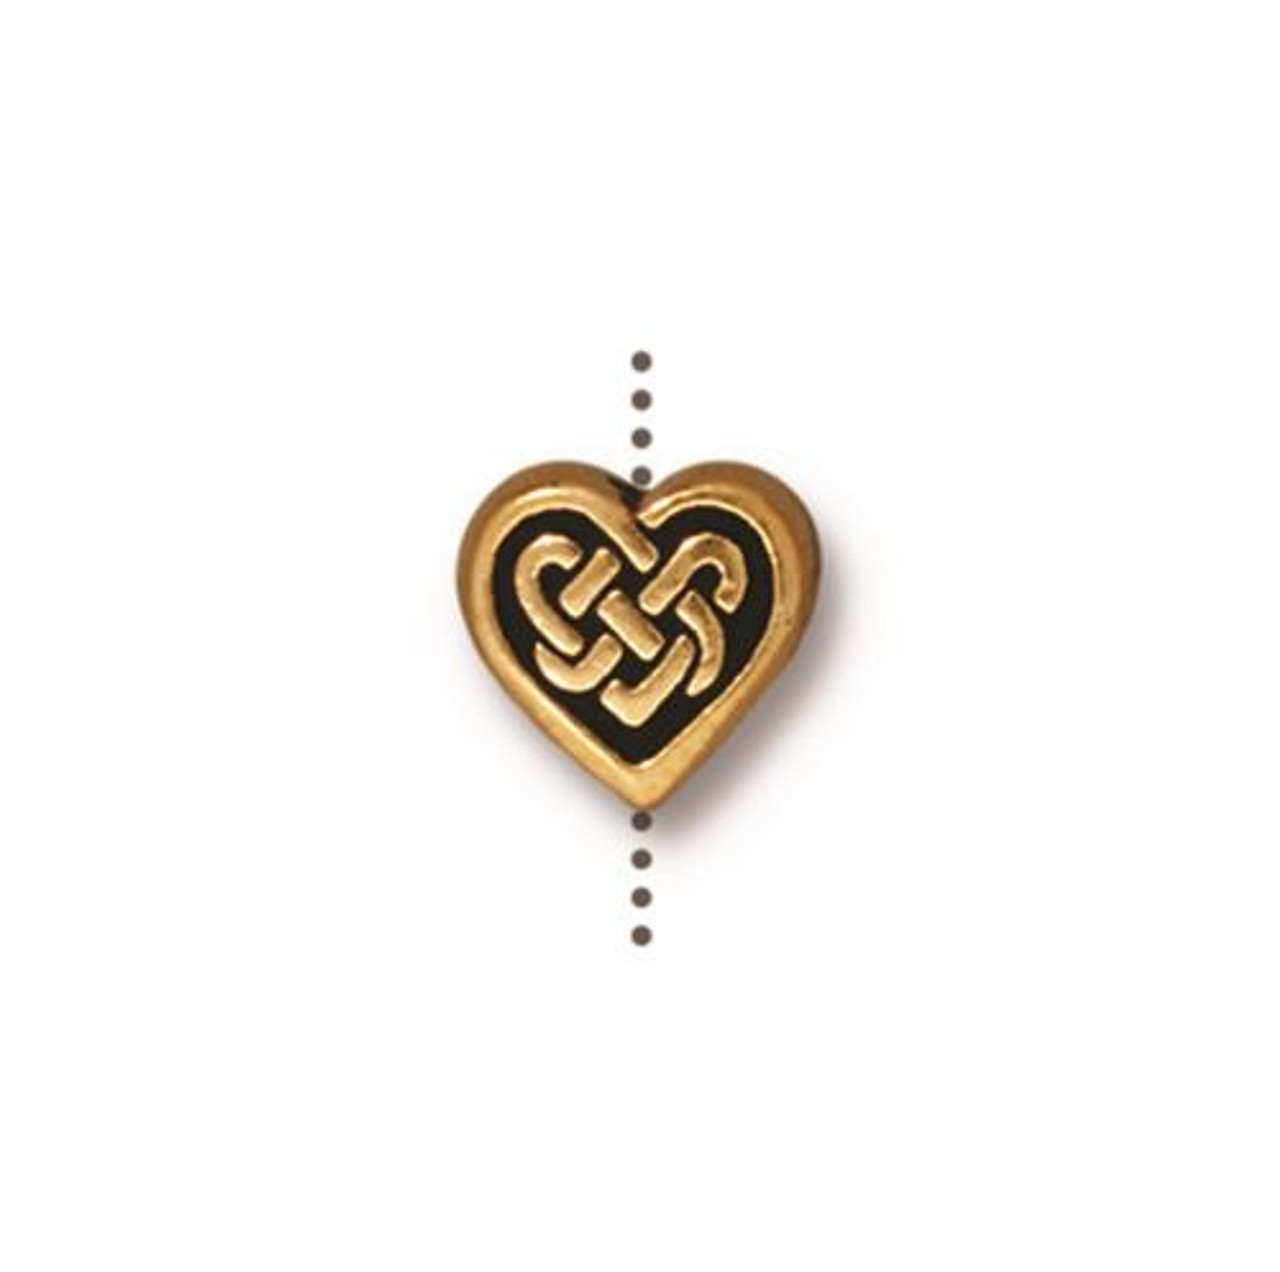 Celtic Heart Bead, Antiqued Gold Plate, 20 per Pack - TierraCast, Inc.